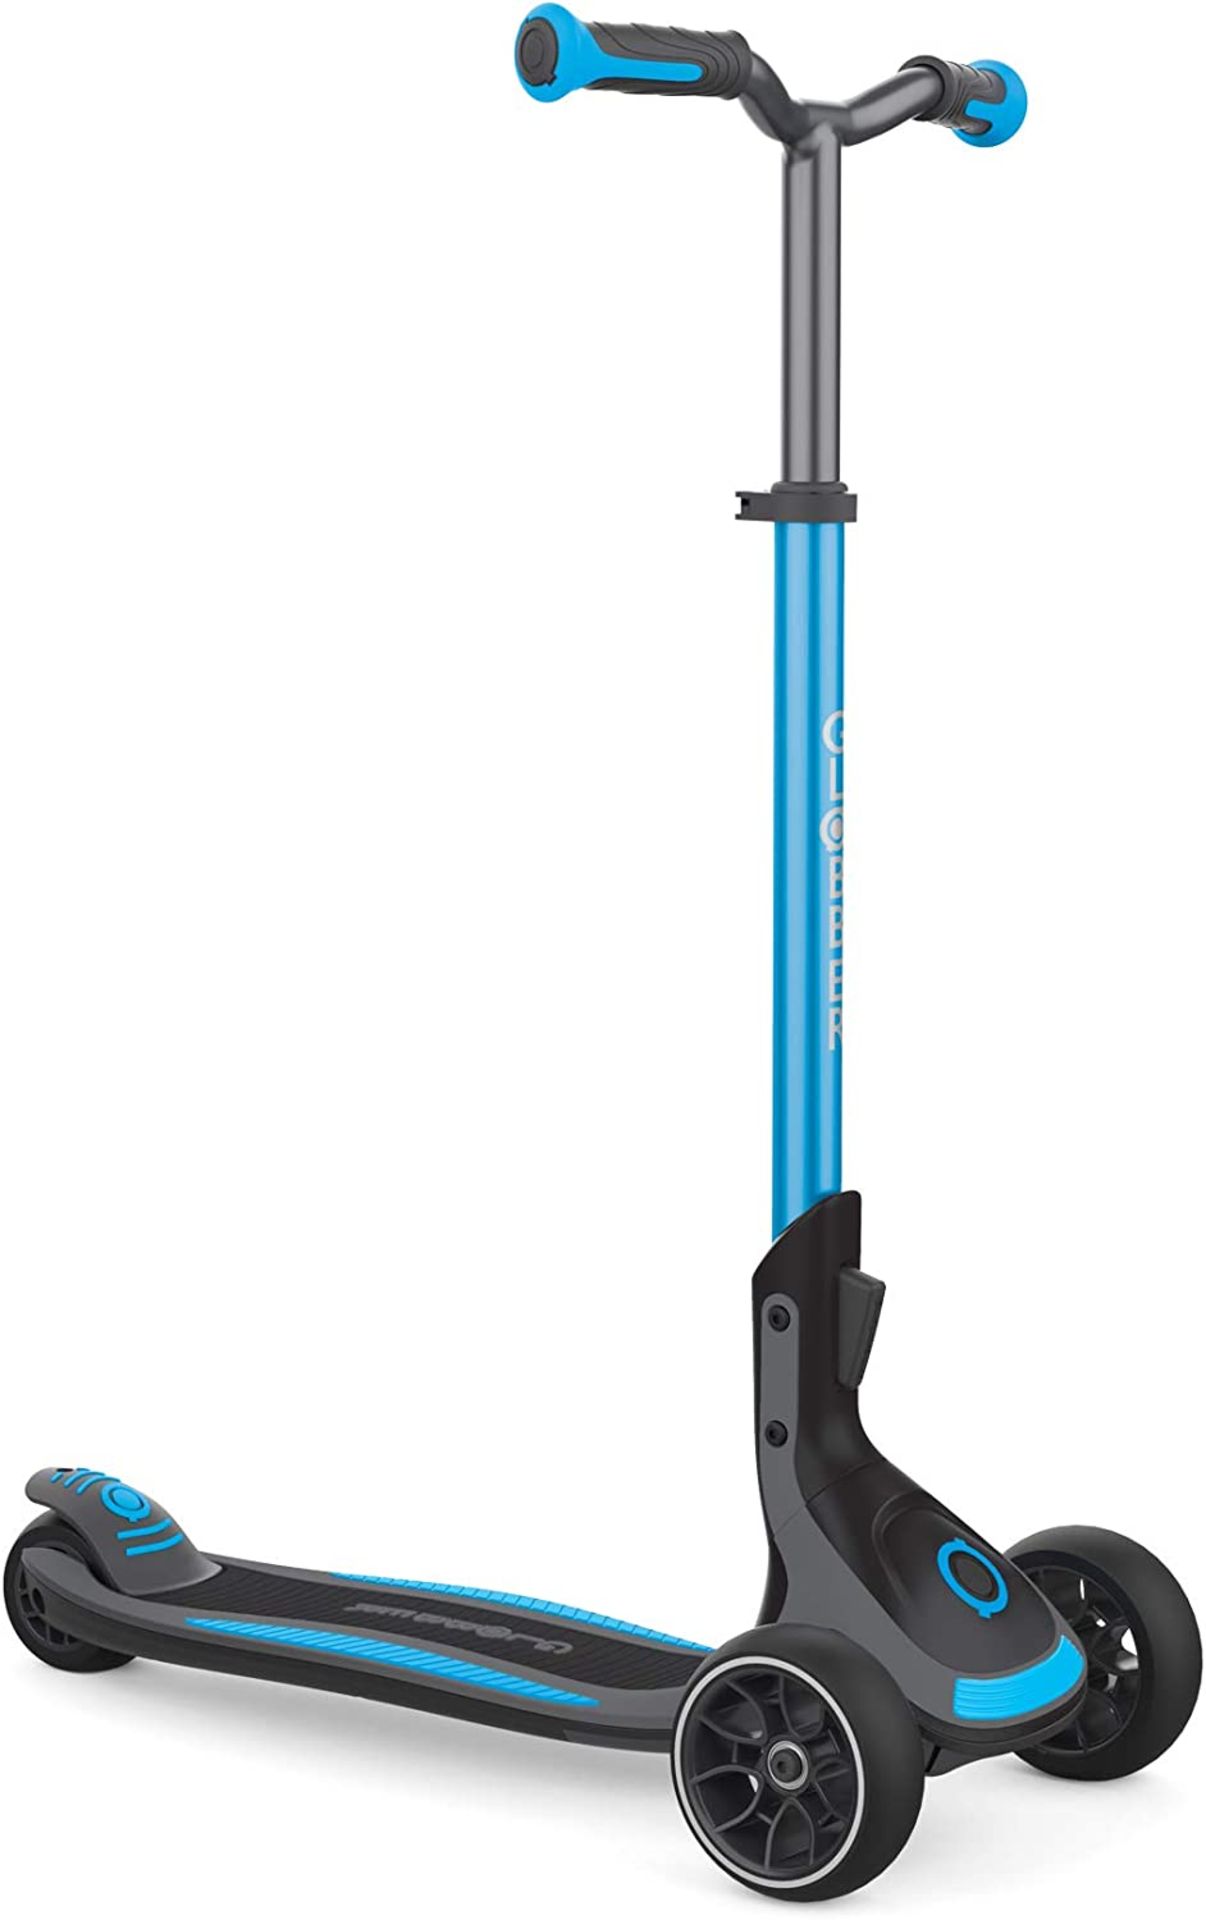 Globber Ultimum Navy Blue Scooter. RRP £125.00. The scooter has patented steering control,